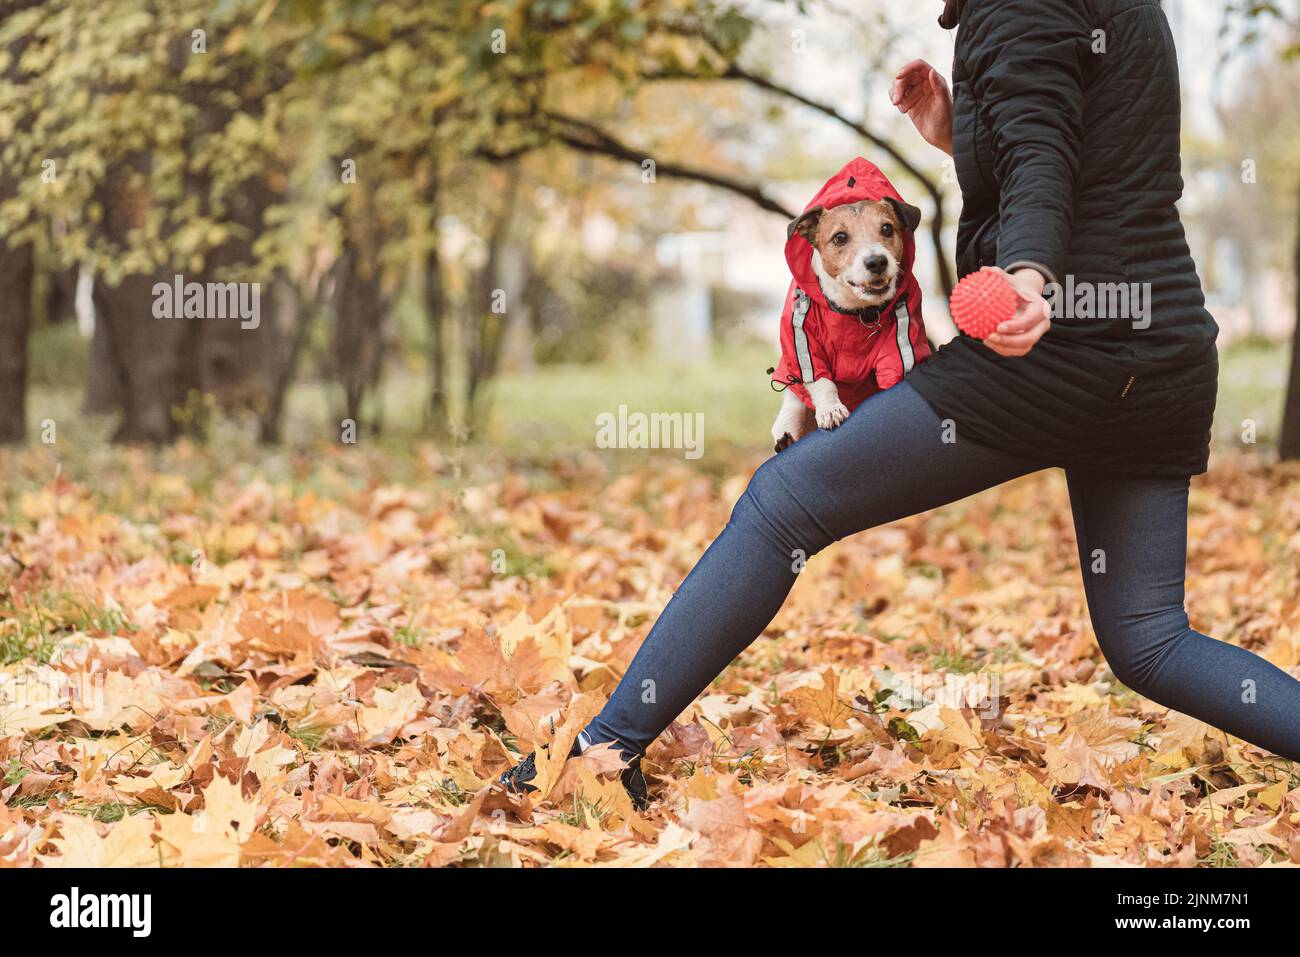 Woman plays actively with dog to keep it healthy and fit. Autumn day in park. Stock Photo